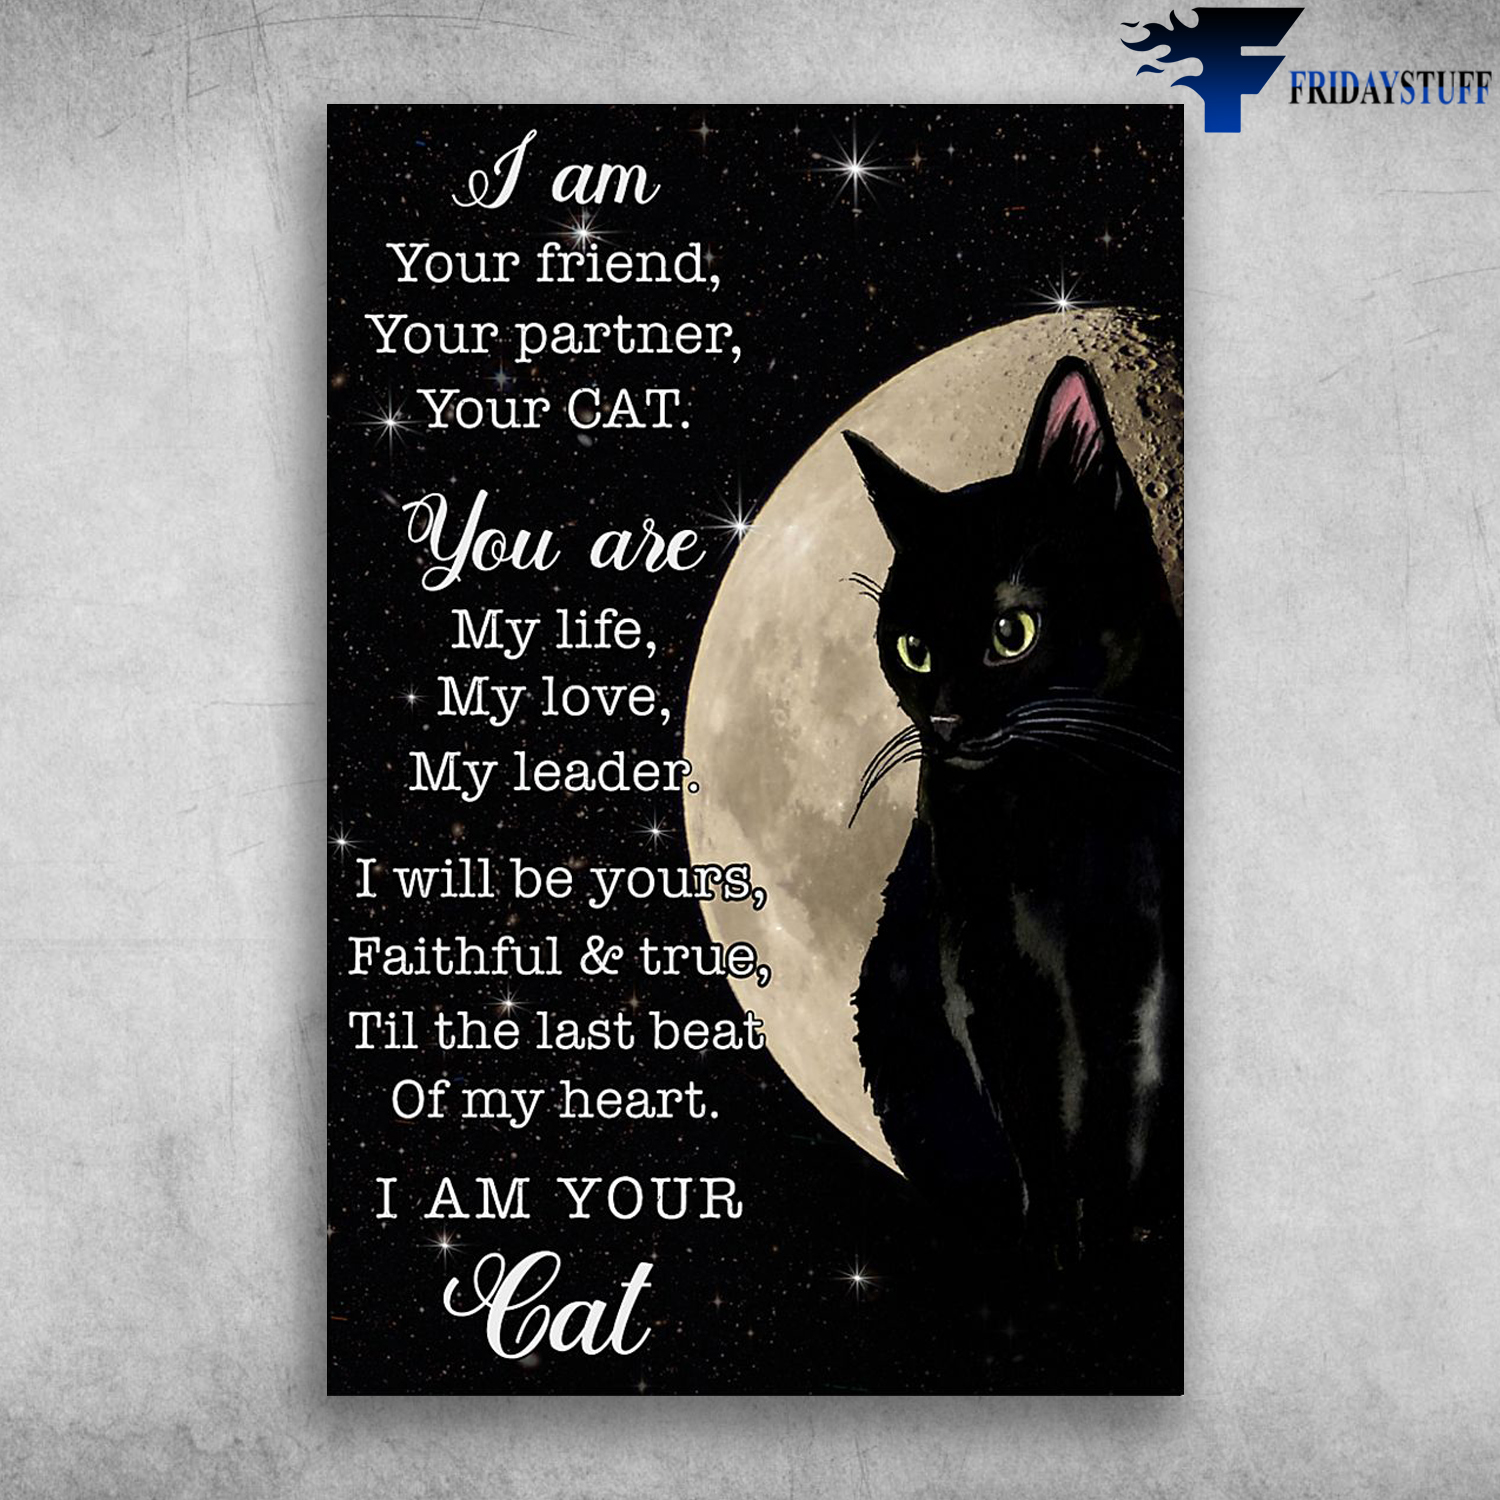 Black Cat And Moon - I Am Your Friend. Your Partner, Your Cat